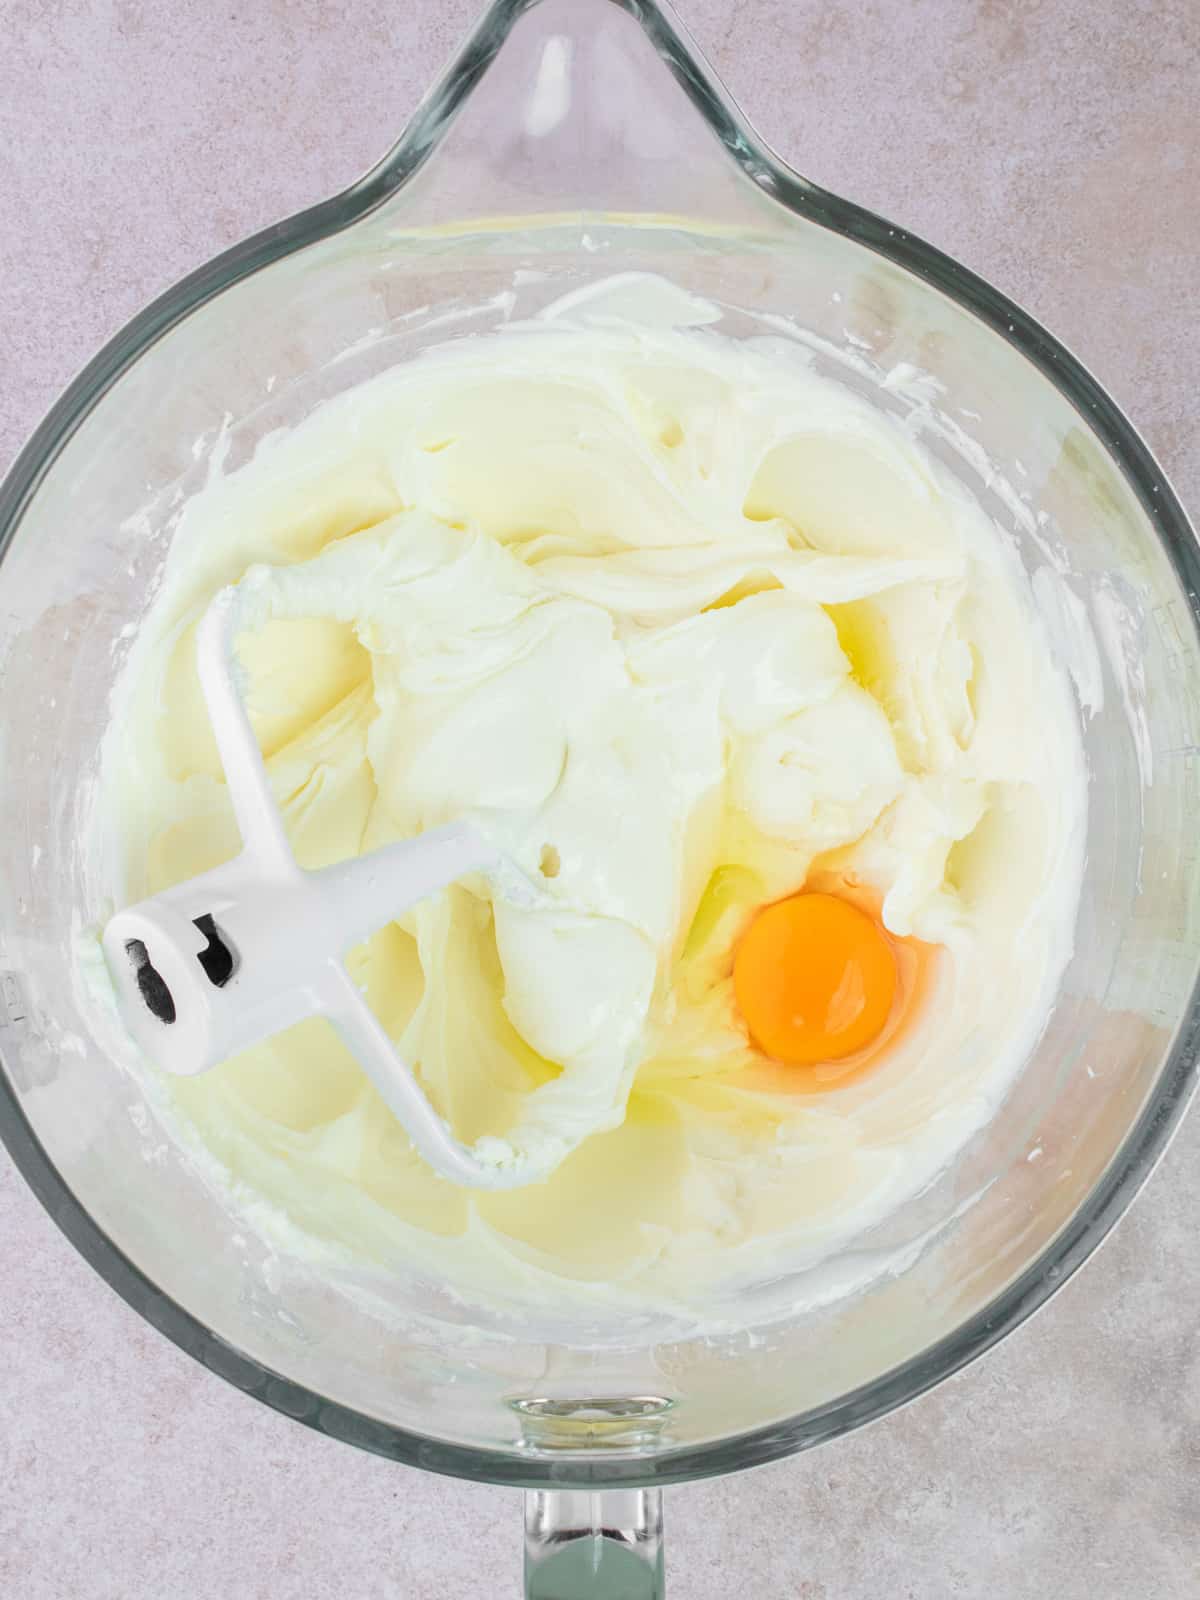 Egg added to cream cheese mixture